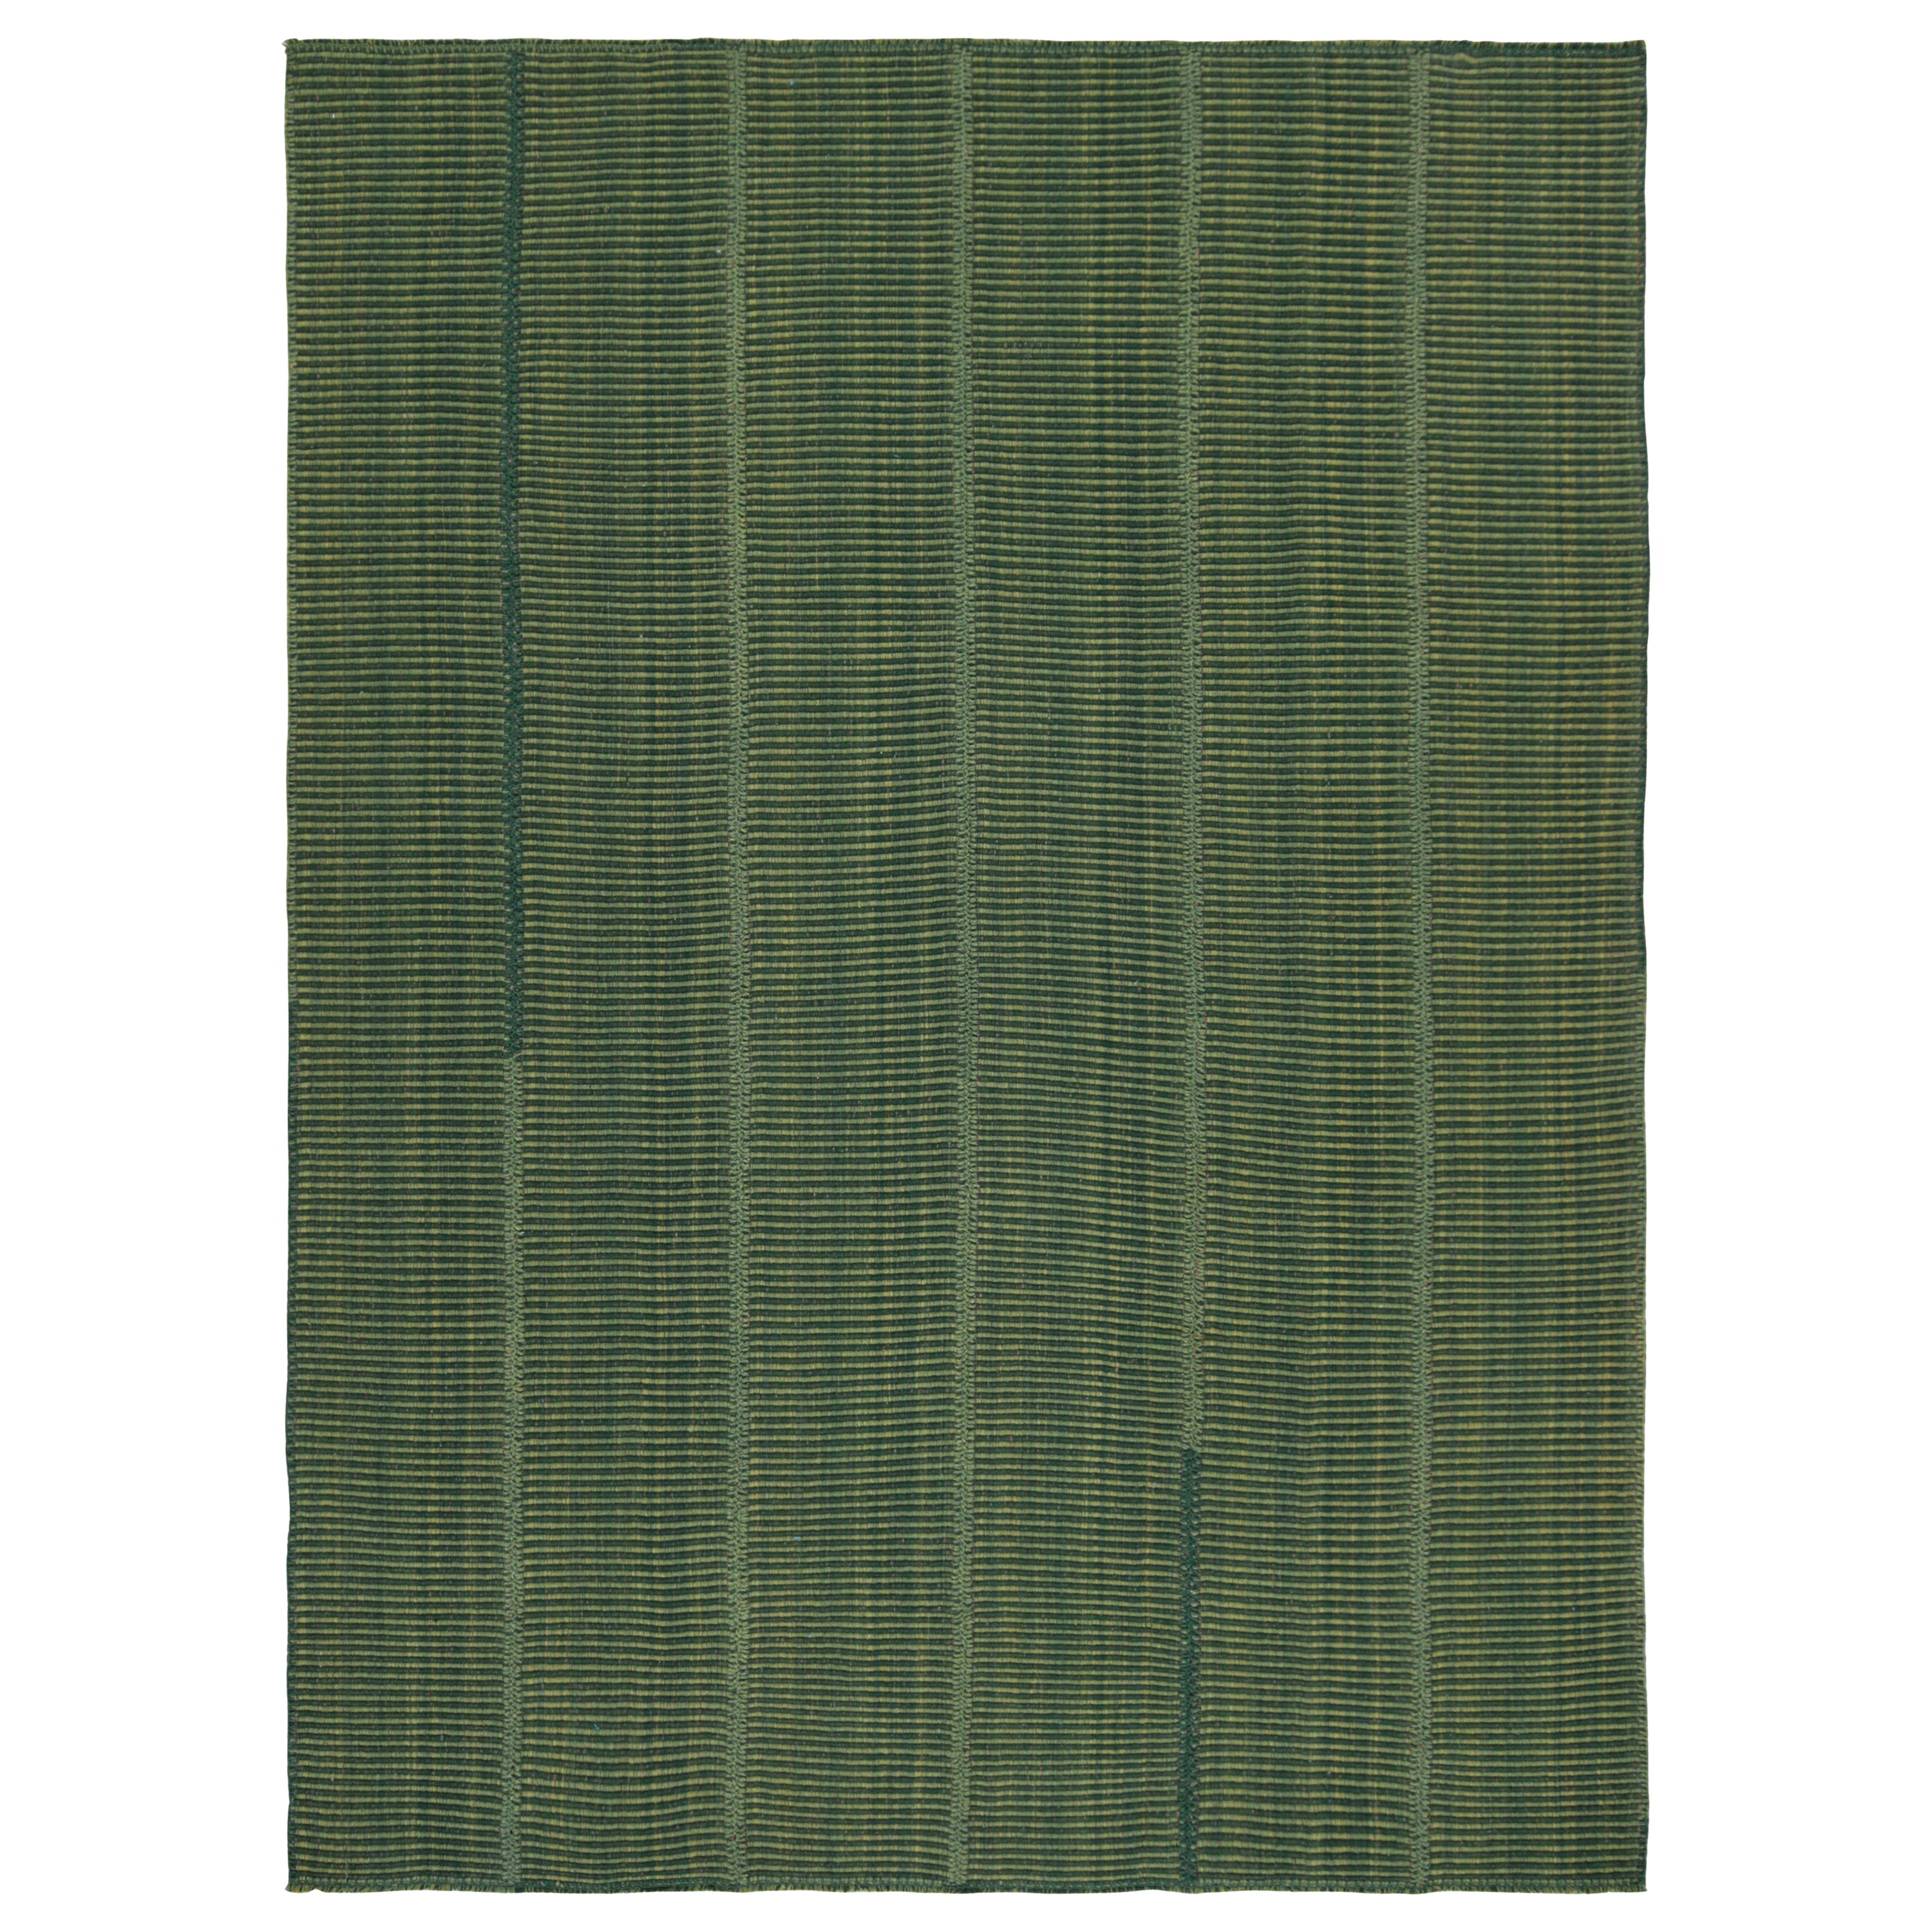 Rug & Kilim’s Contemporary Kilim in Green with Subtle Stripes